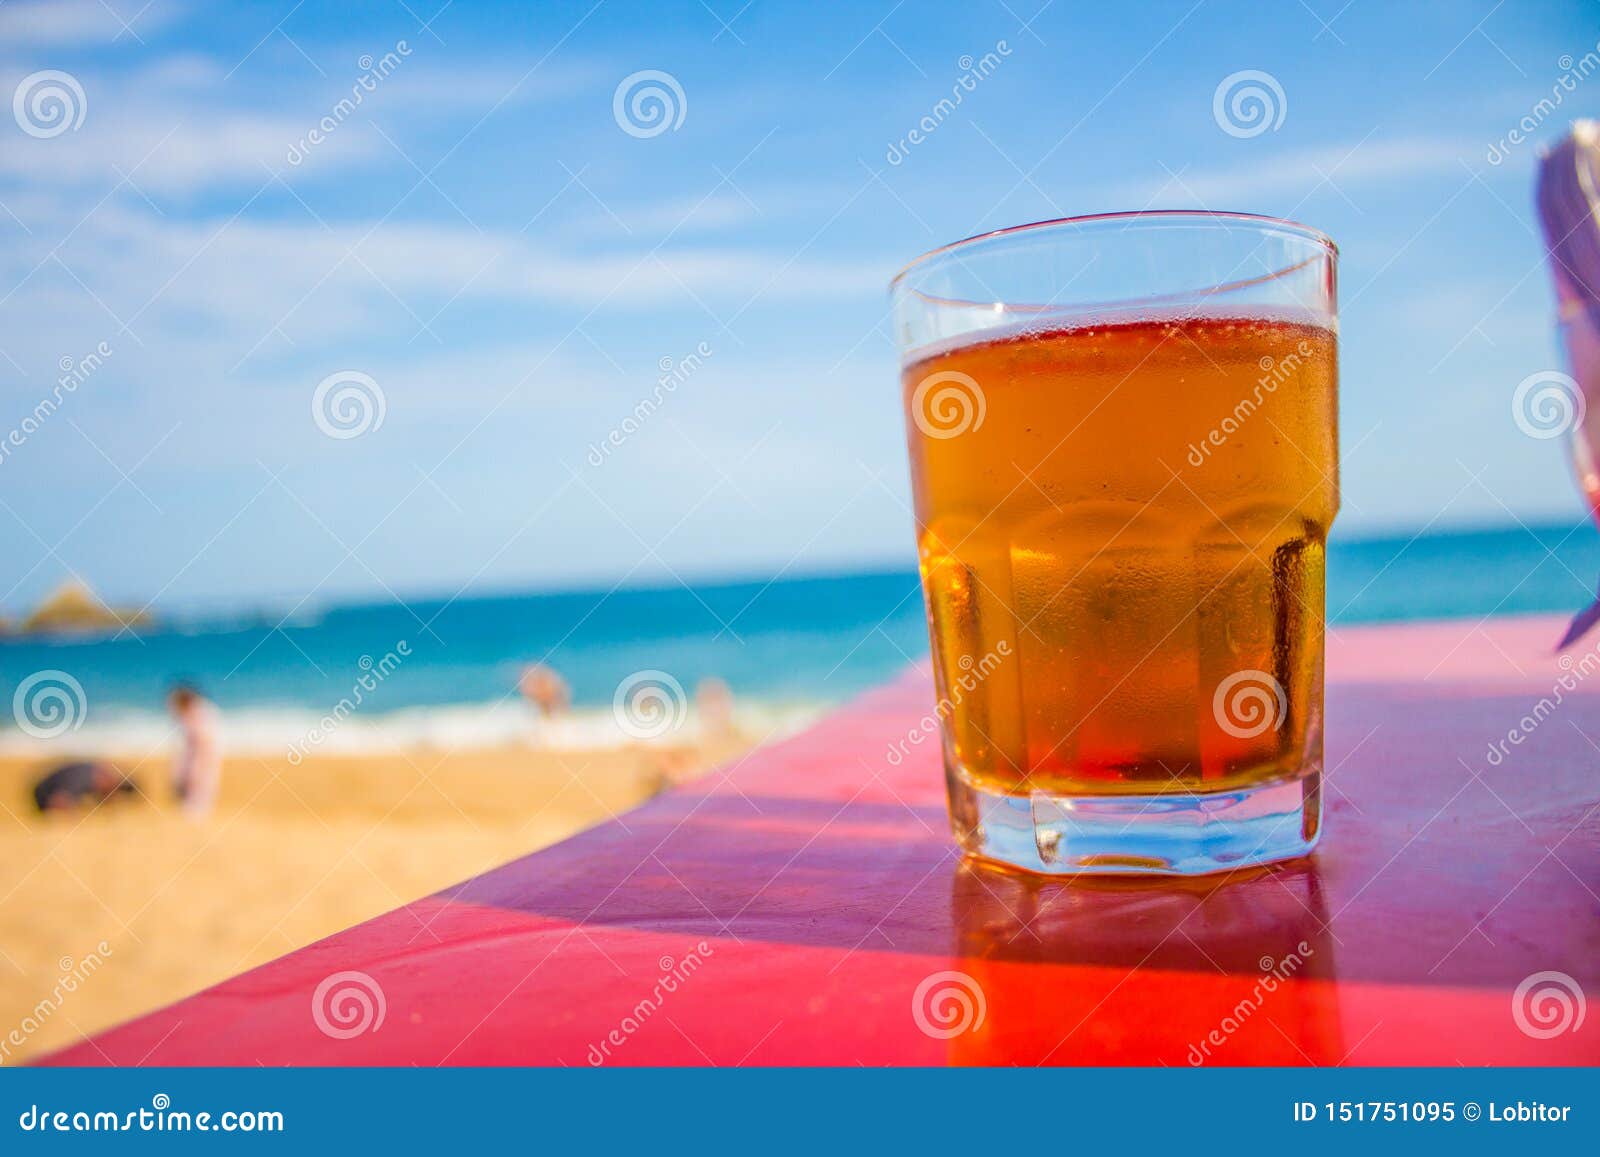 glass of beer on the beach in oaxaca